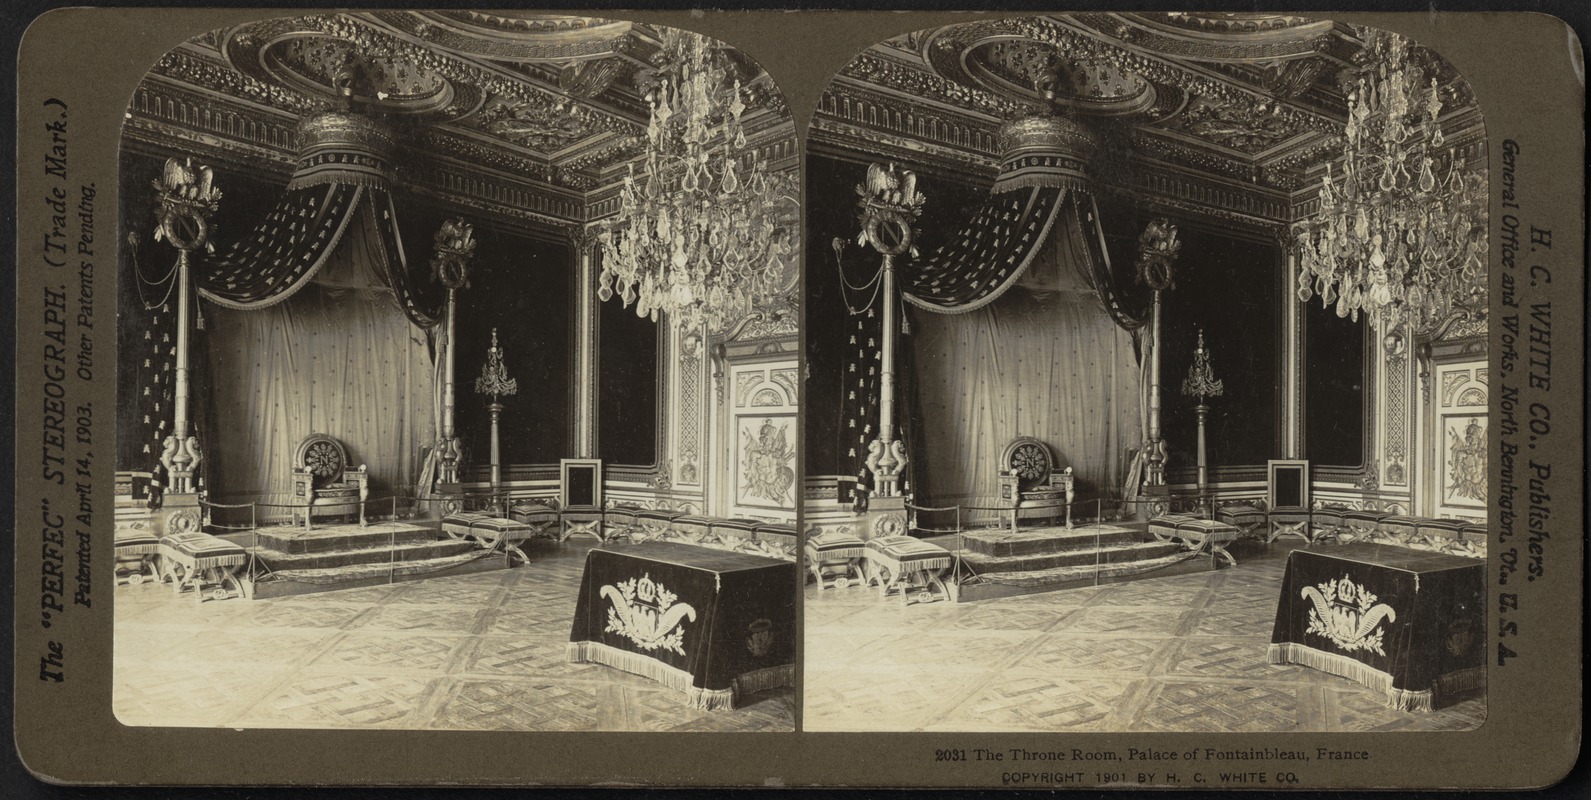 The throne room, Palace of Fontainbleau, France